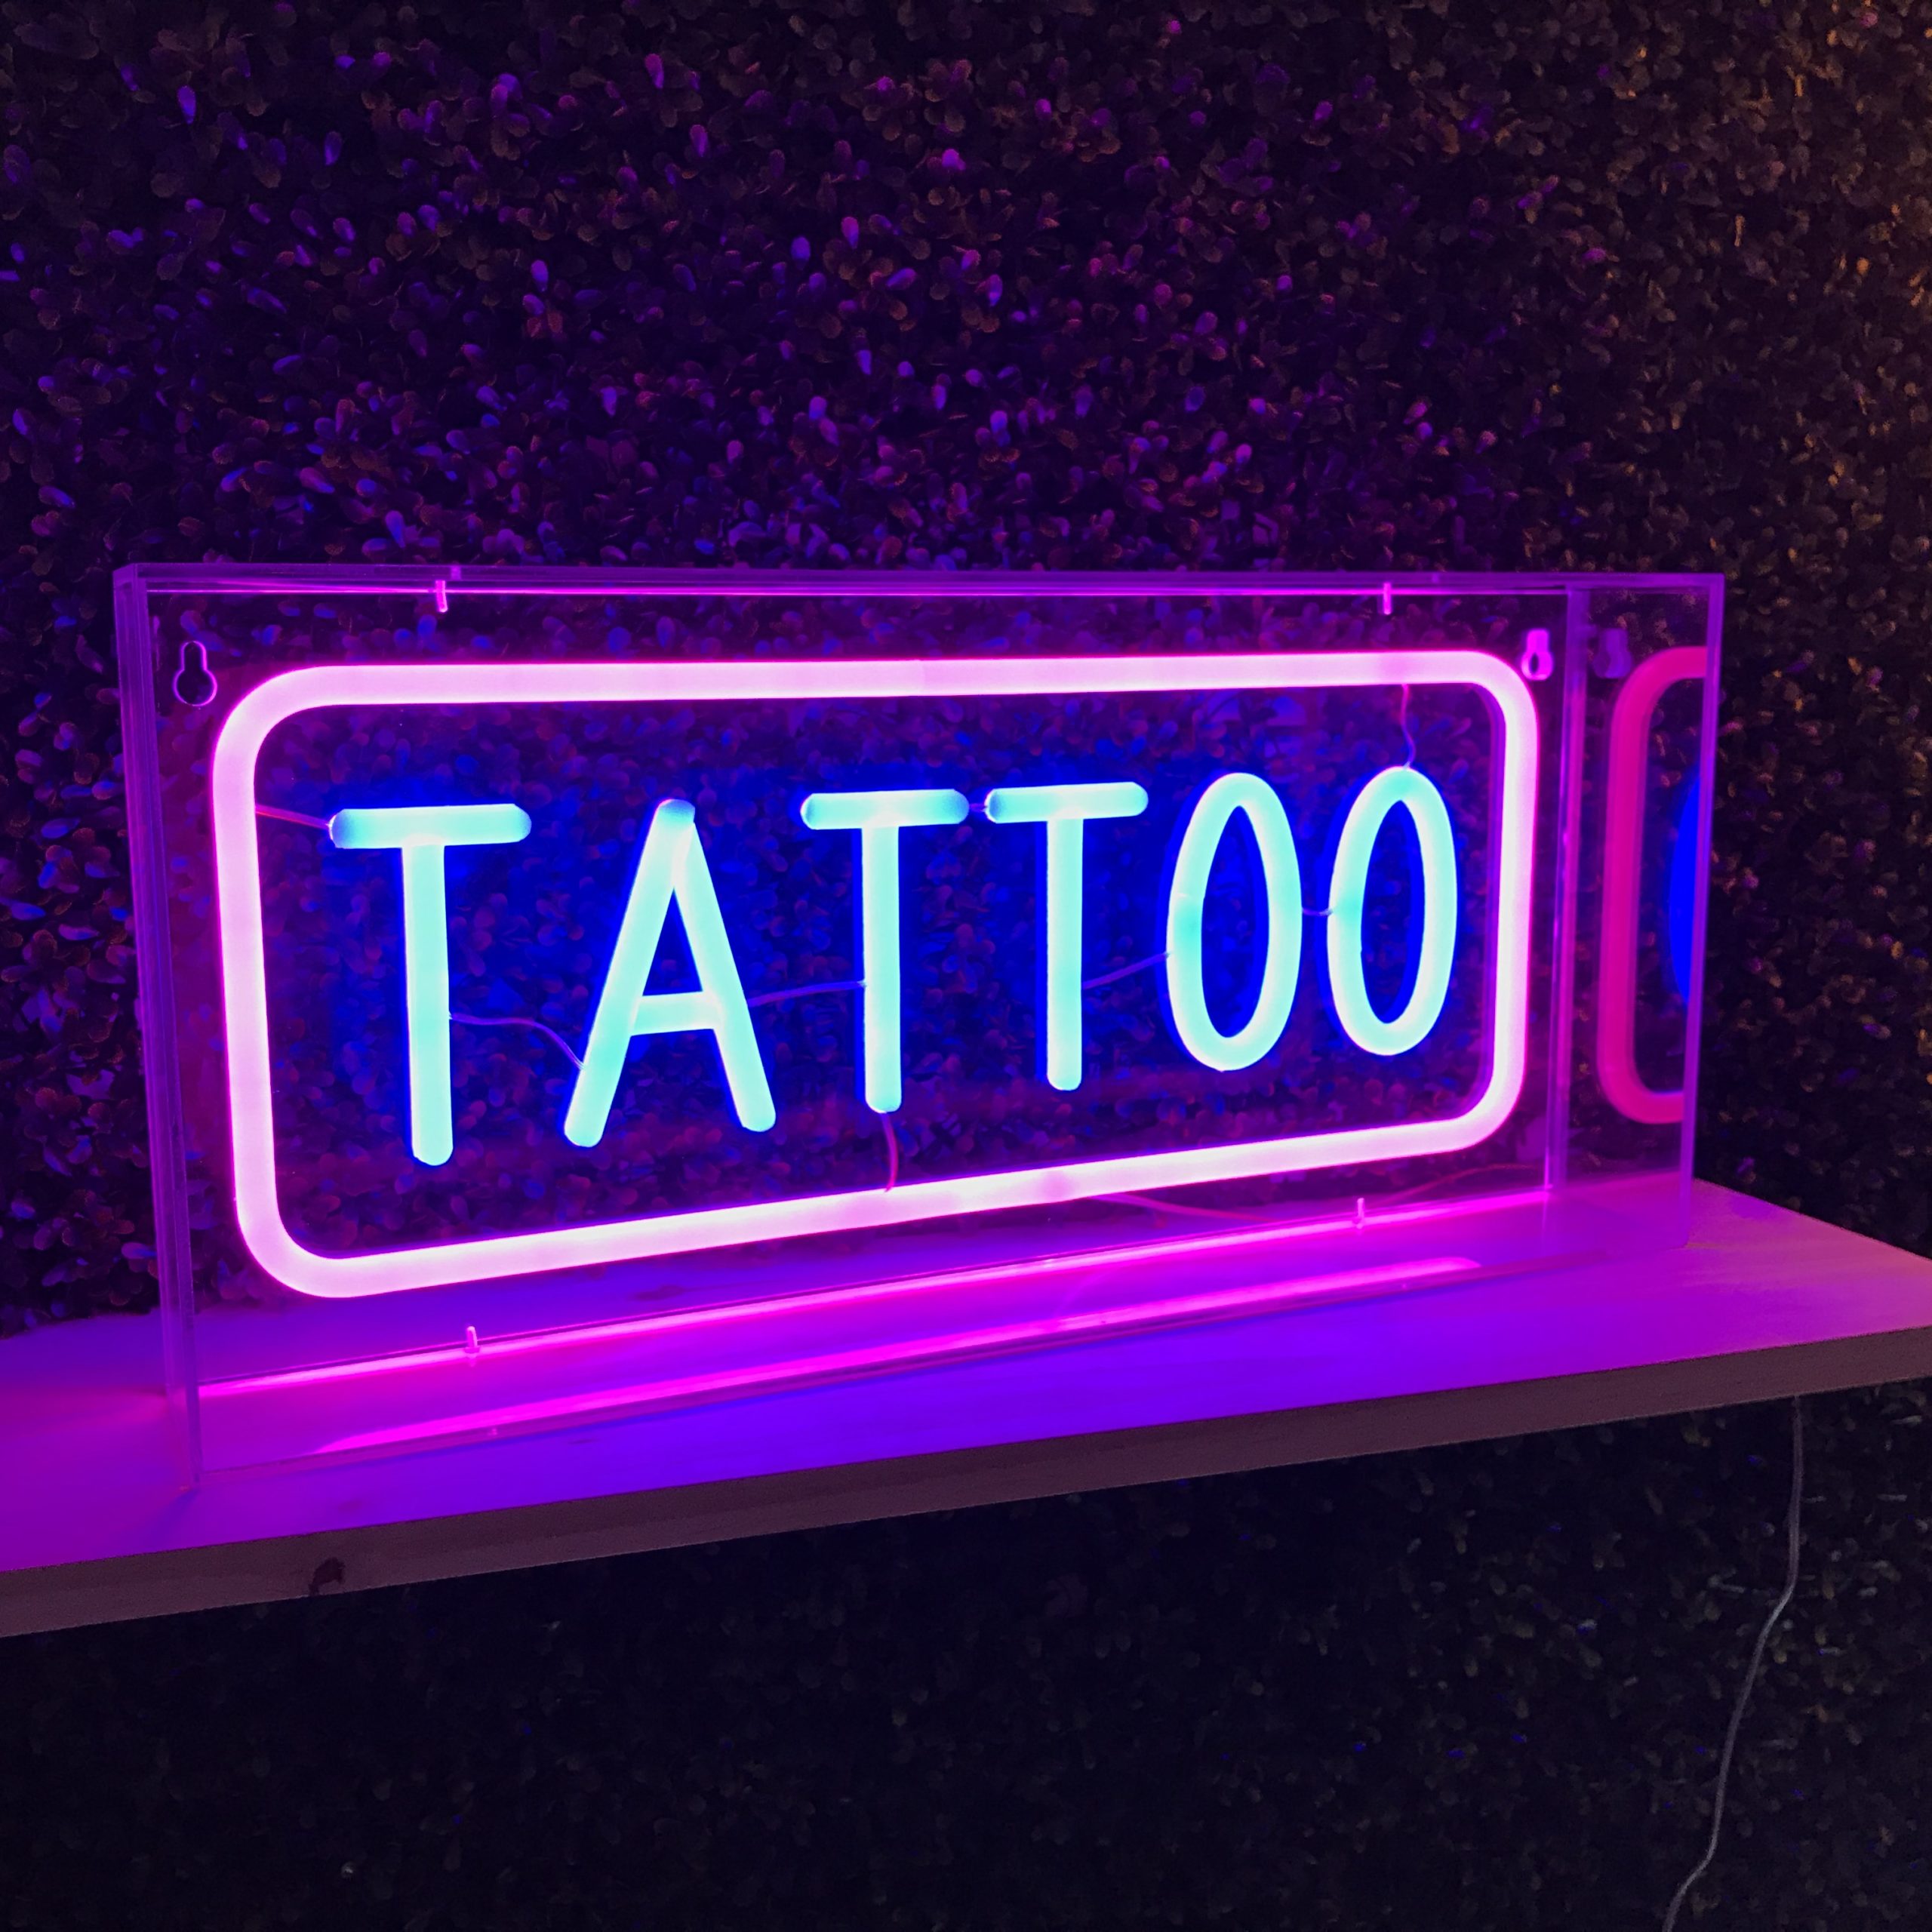 Neon slogan sign for sale  Bespoke neon lights from Neon Works  TATTOO   acrylic box  Neon Works